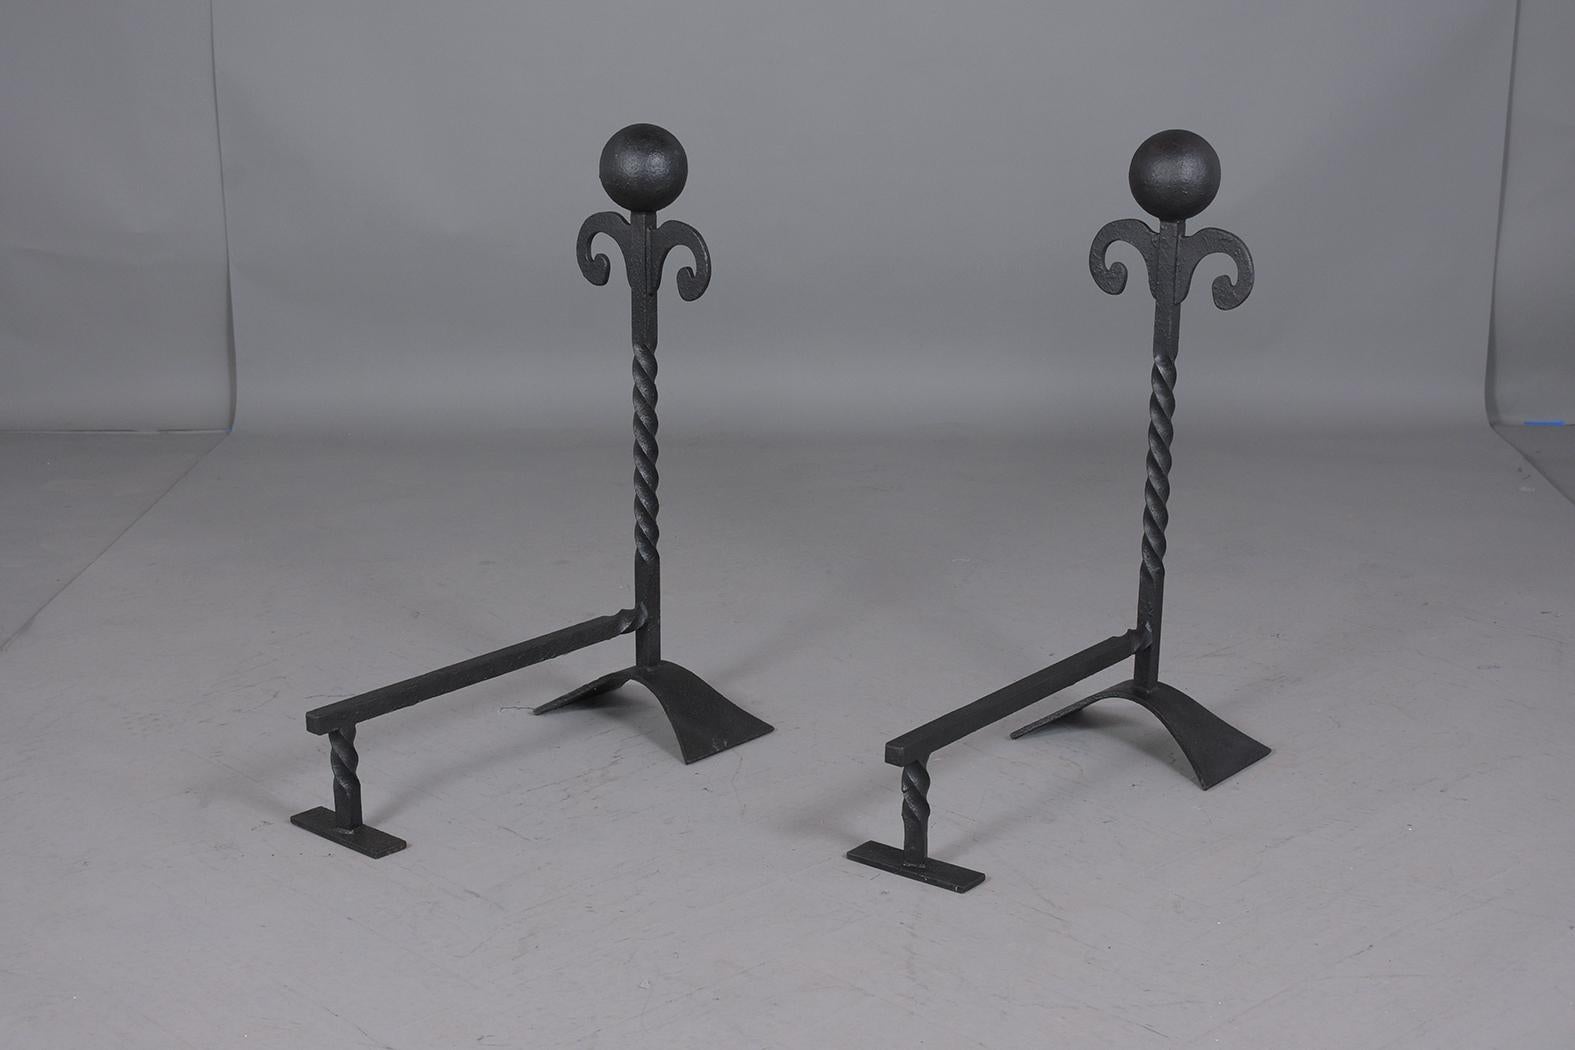 A set of baroque-style fireplace chenets hand forged out of iron that has been painted in black color with a polished patina finish. These large chenets feature an elegant baroque design and are ready to be used for years to come.